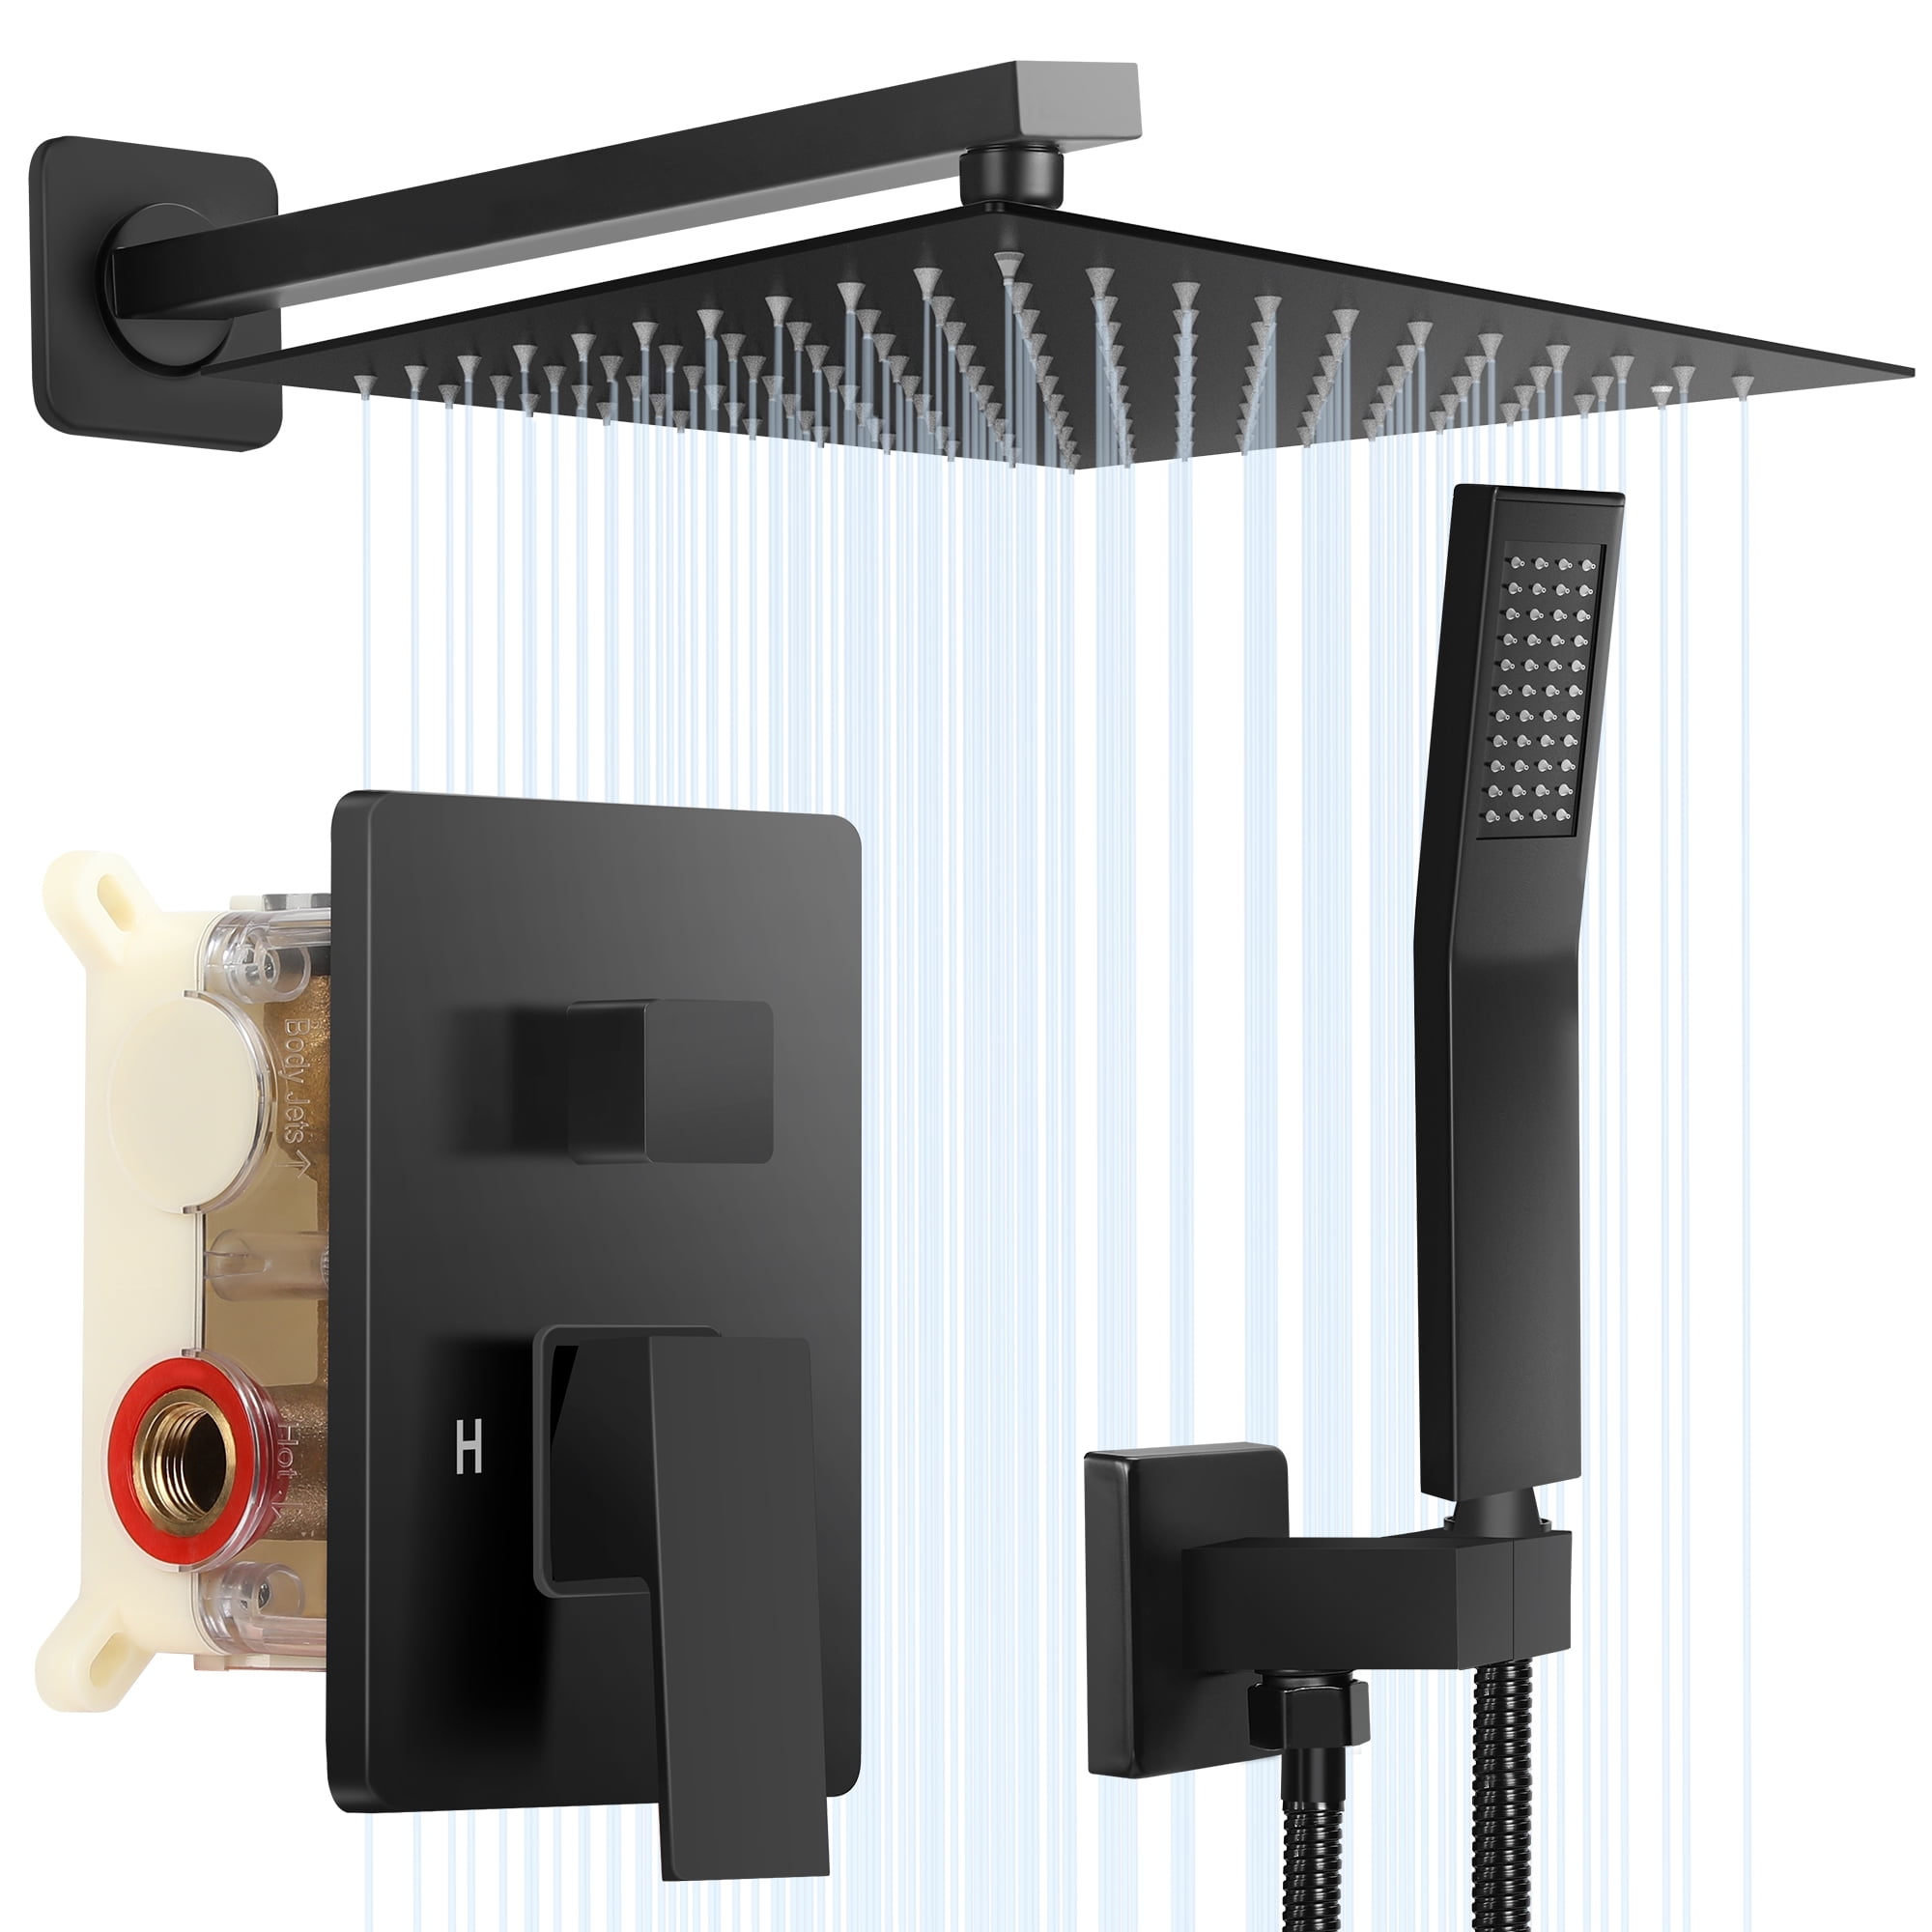 High Pressure Square Rain Shower Head Combo, Equipped with all Metal Hand  Shower, 78 Extra Long Hose, 3-Way Diverter, Adhesive Shower Head Holder  (WOSAISIUS Square Shower Head Set Black) 